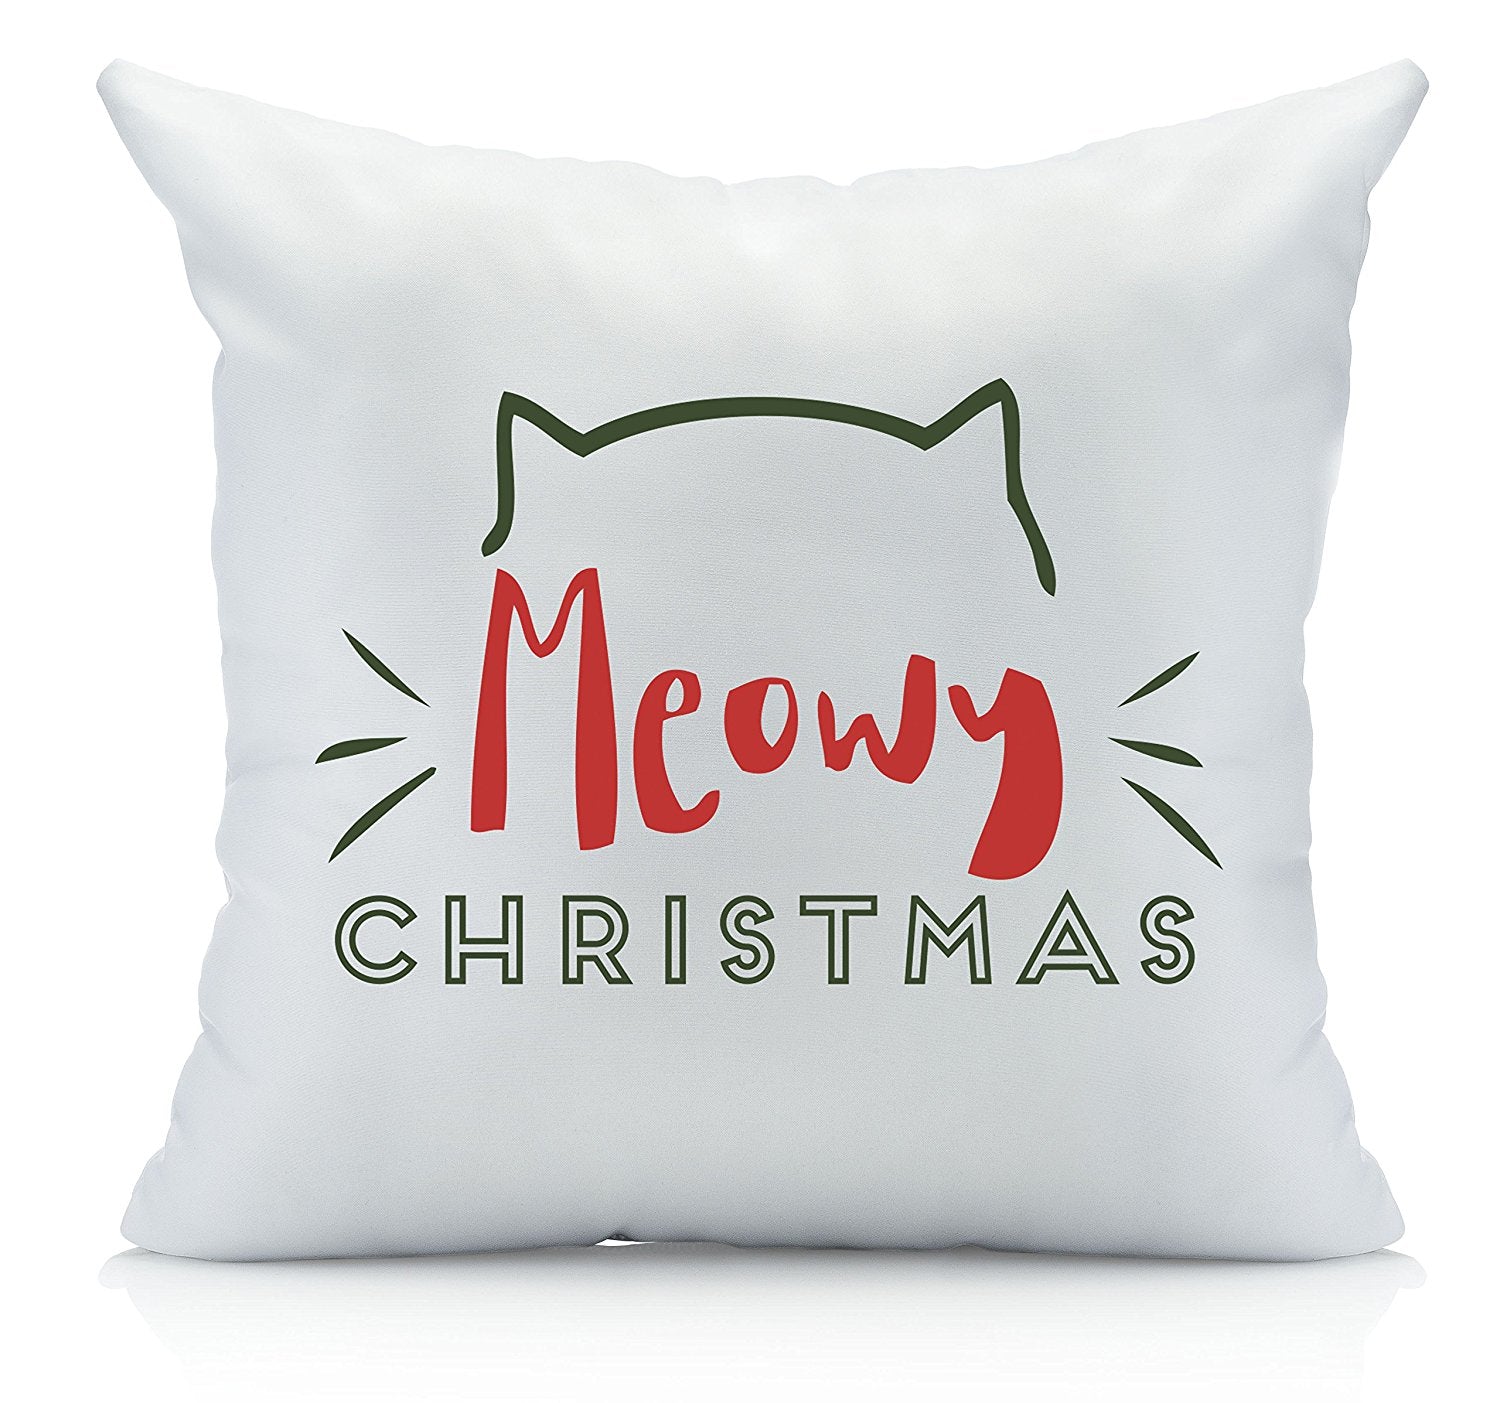 Meowy Christmas Throw Pillow Cover Multicolor (1 18 by 18 Inches) Holiday Gifts